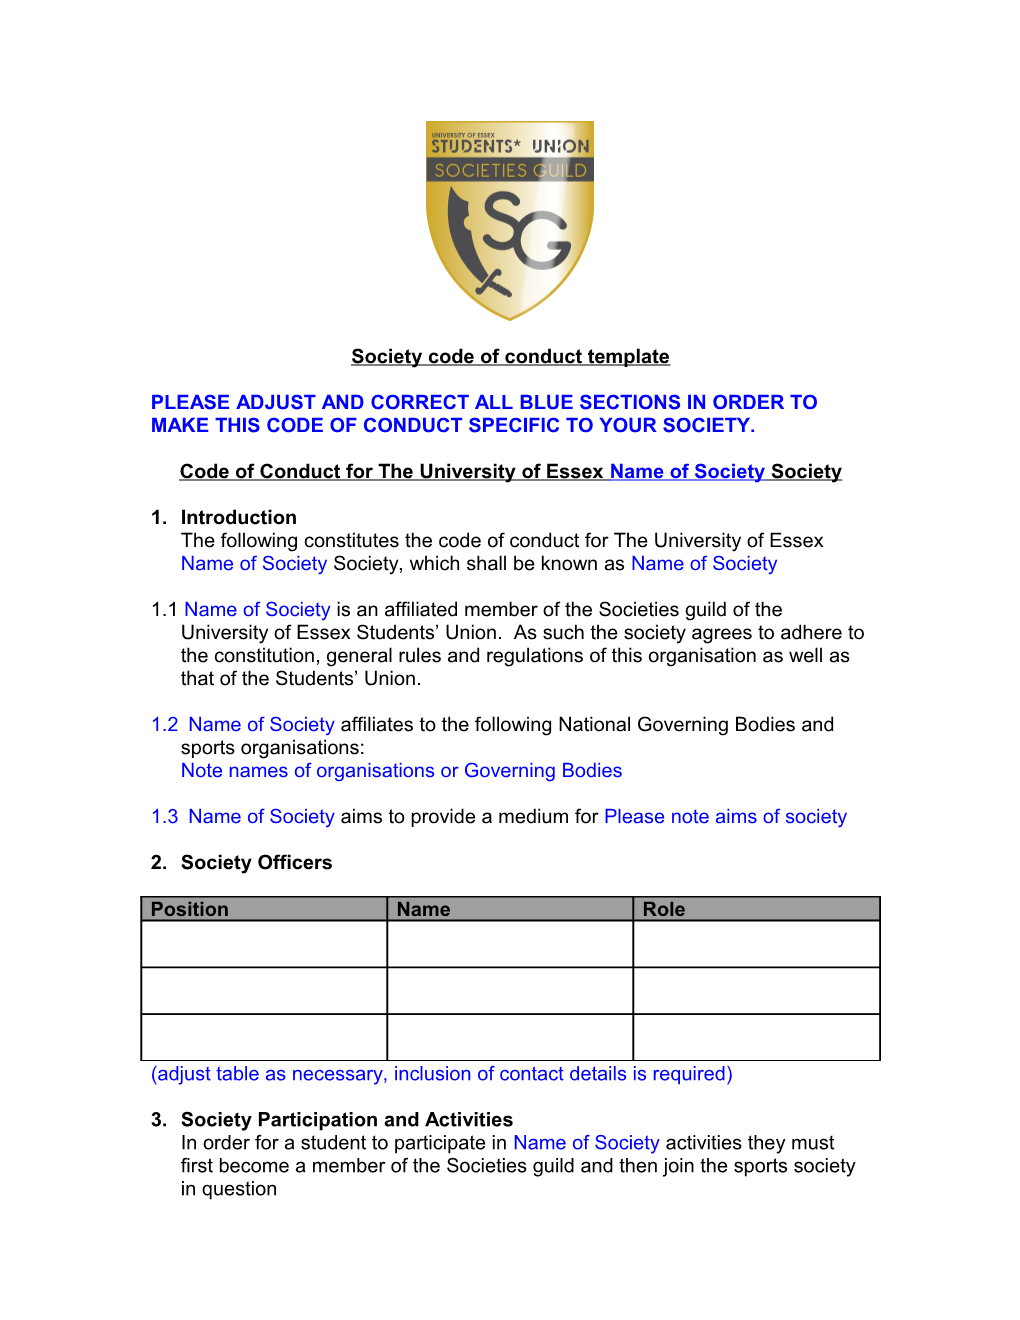 Club Code of Conduct Template